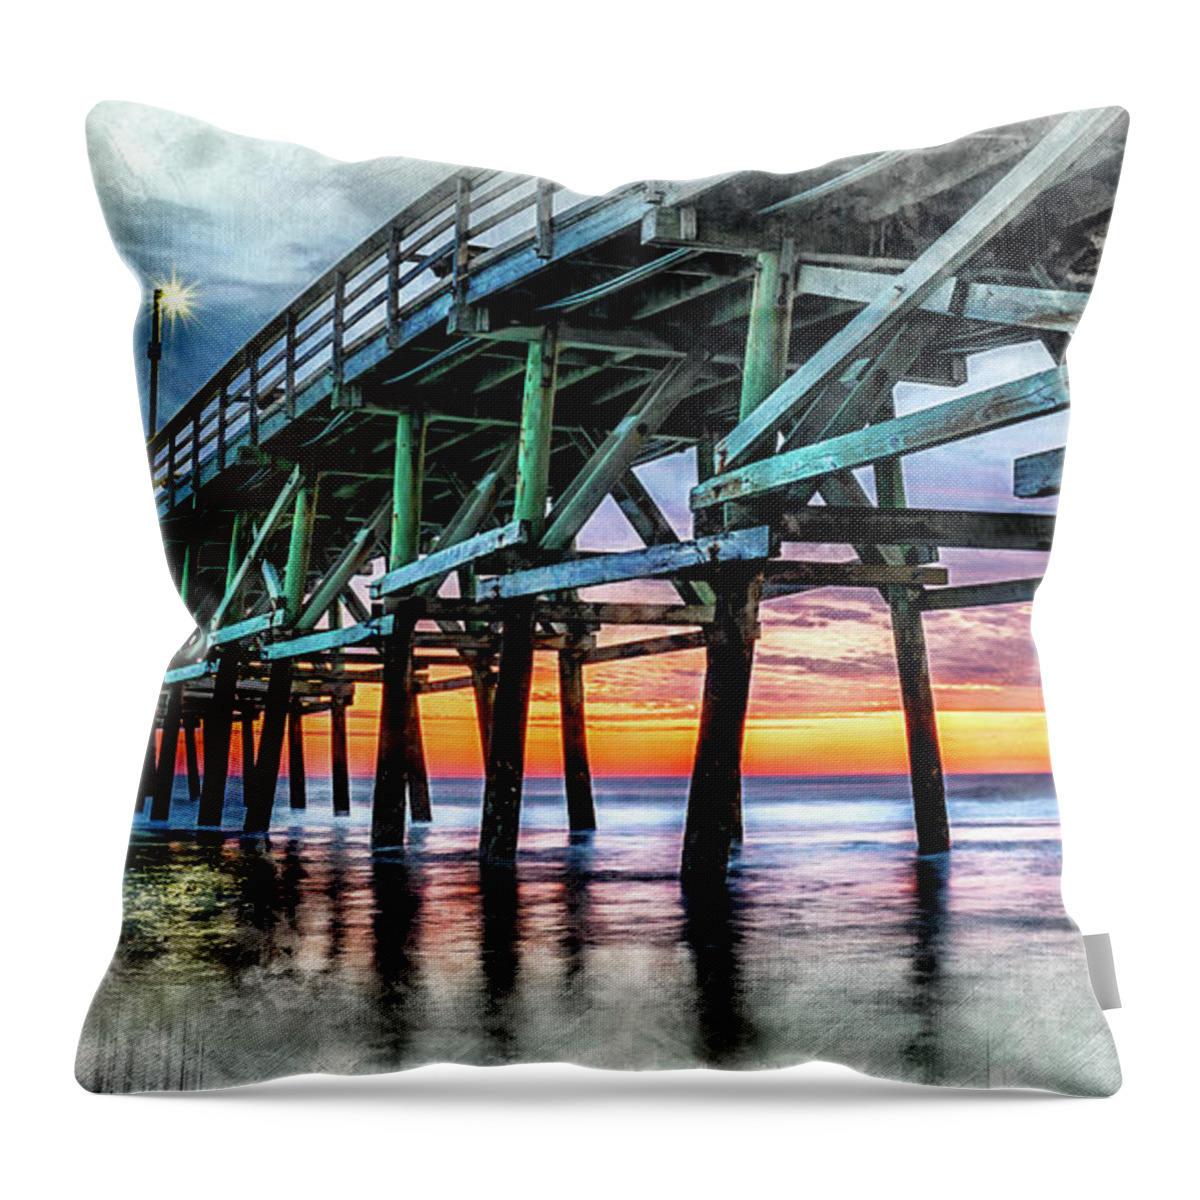 Sunset Throw Pillow featuring the digital art Sunset in Cherry Grove by David Smith